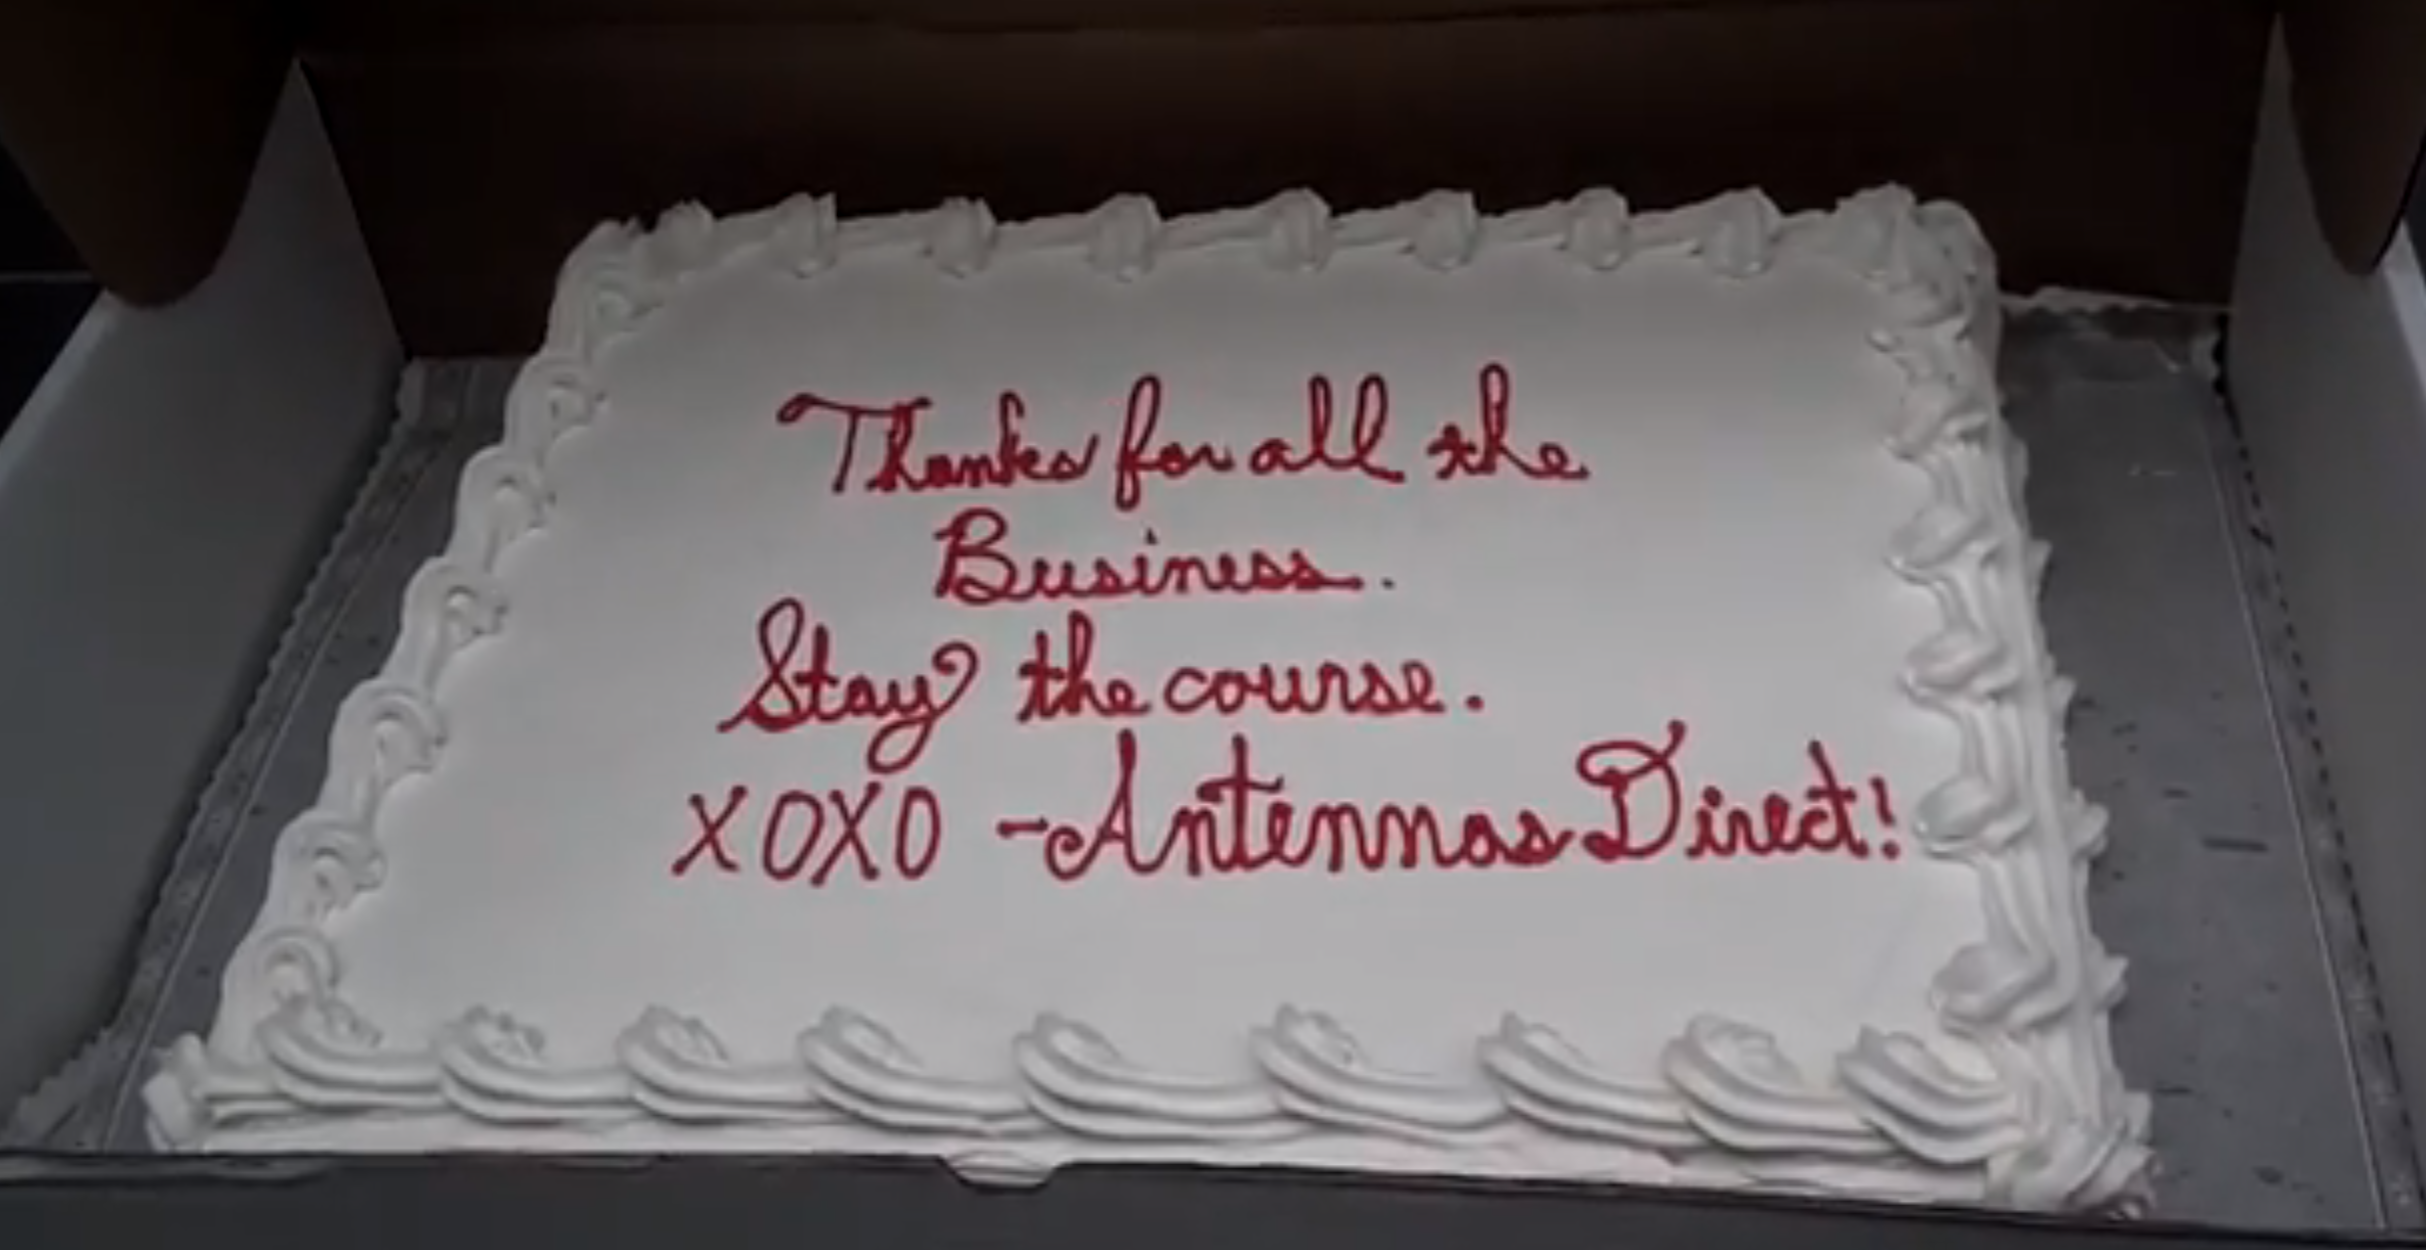 Results image of Thank You cake from Antennas Direct